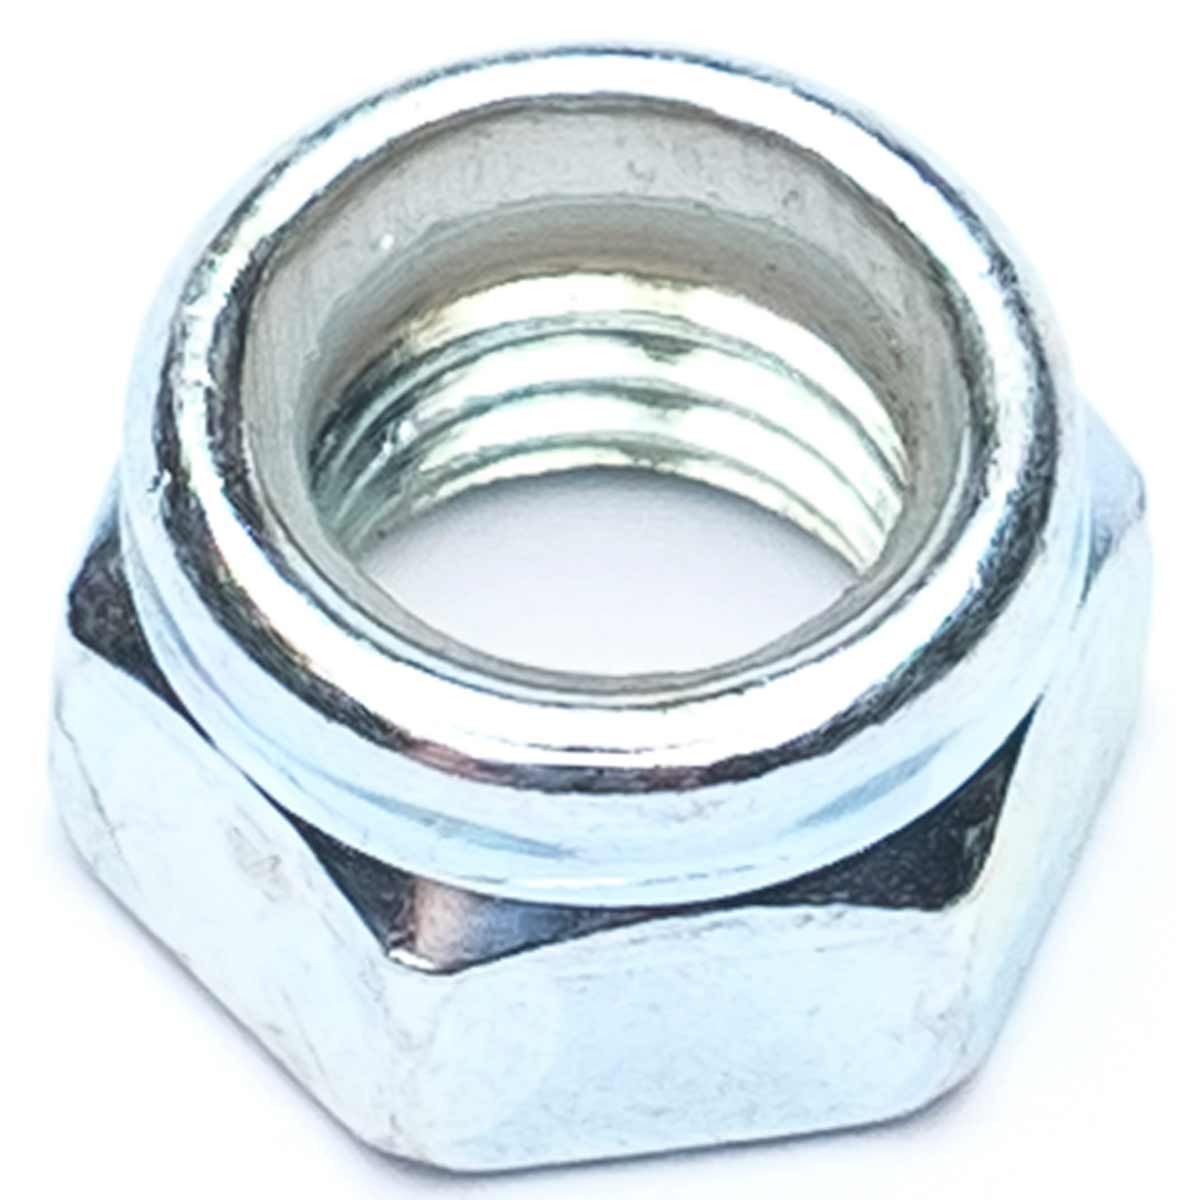 AG Zinc Plated Nut for Isis Ball Valves 3/4" & 1"